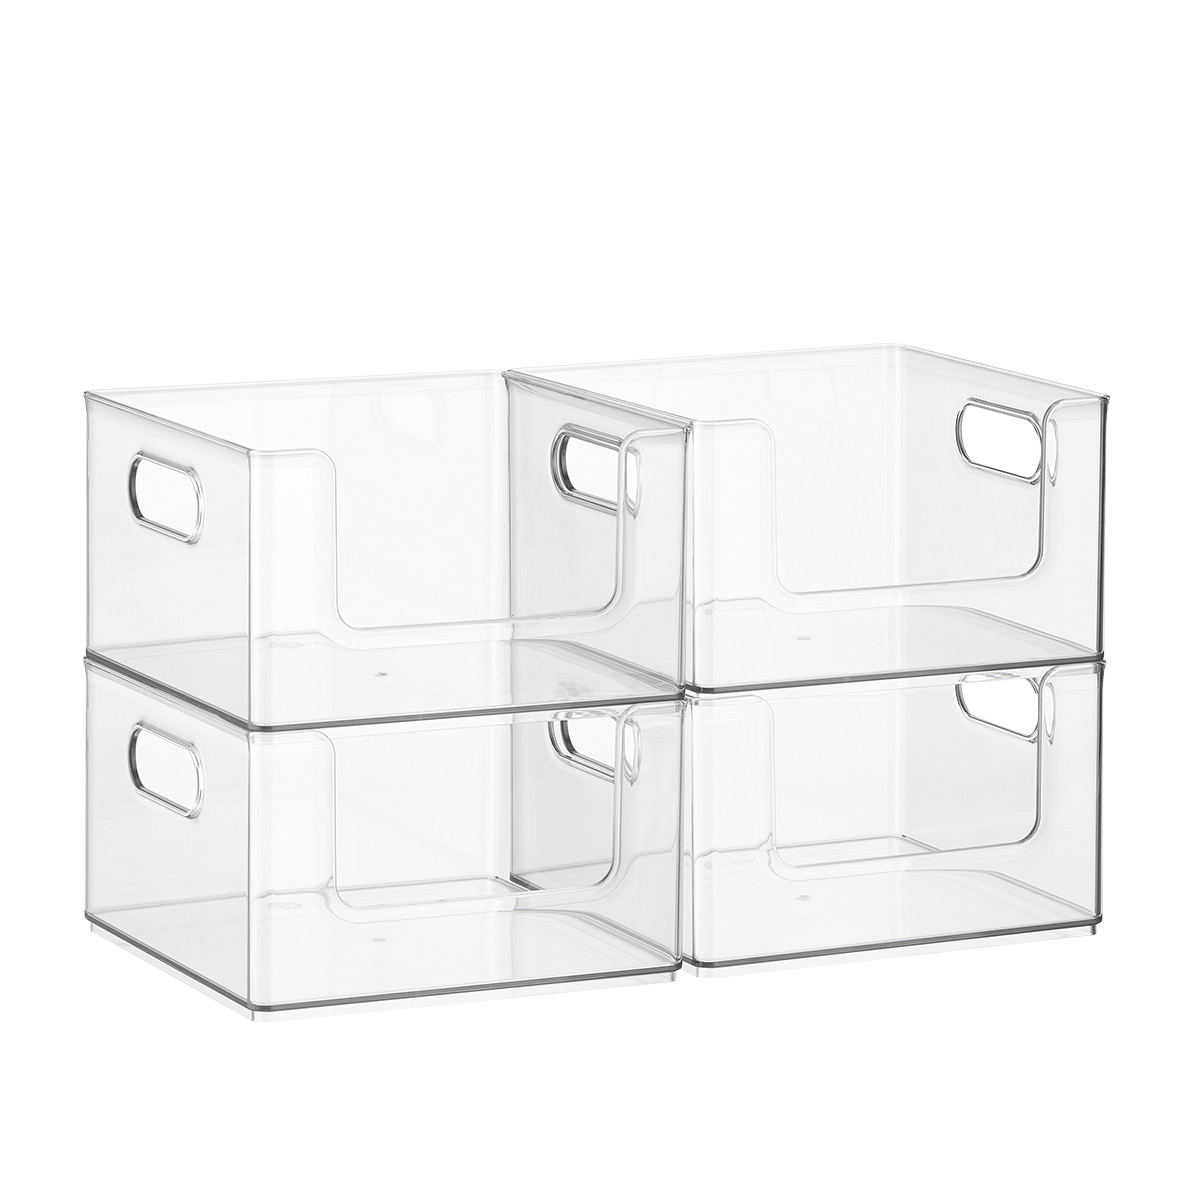 Case of 4 T.H.E. Stacking Pantry Bin Clear